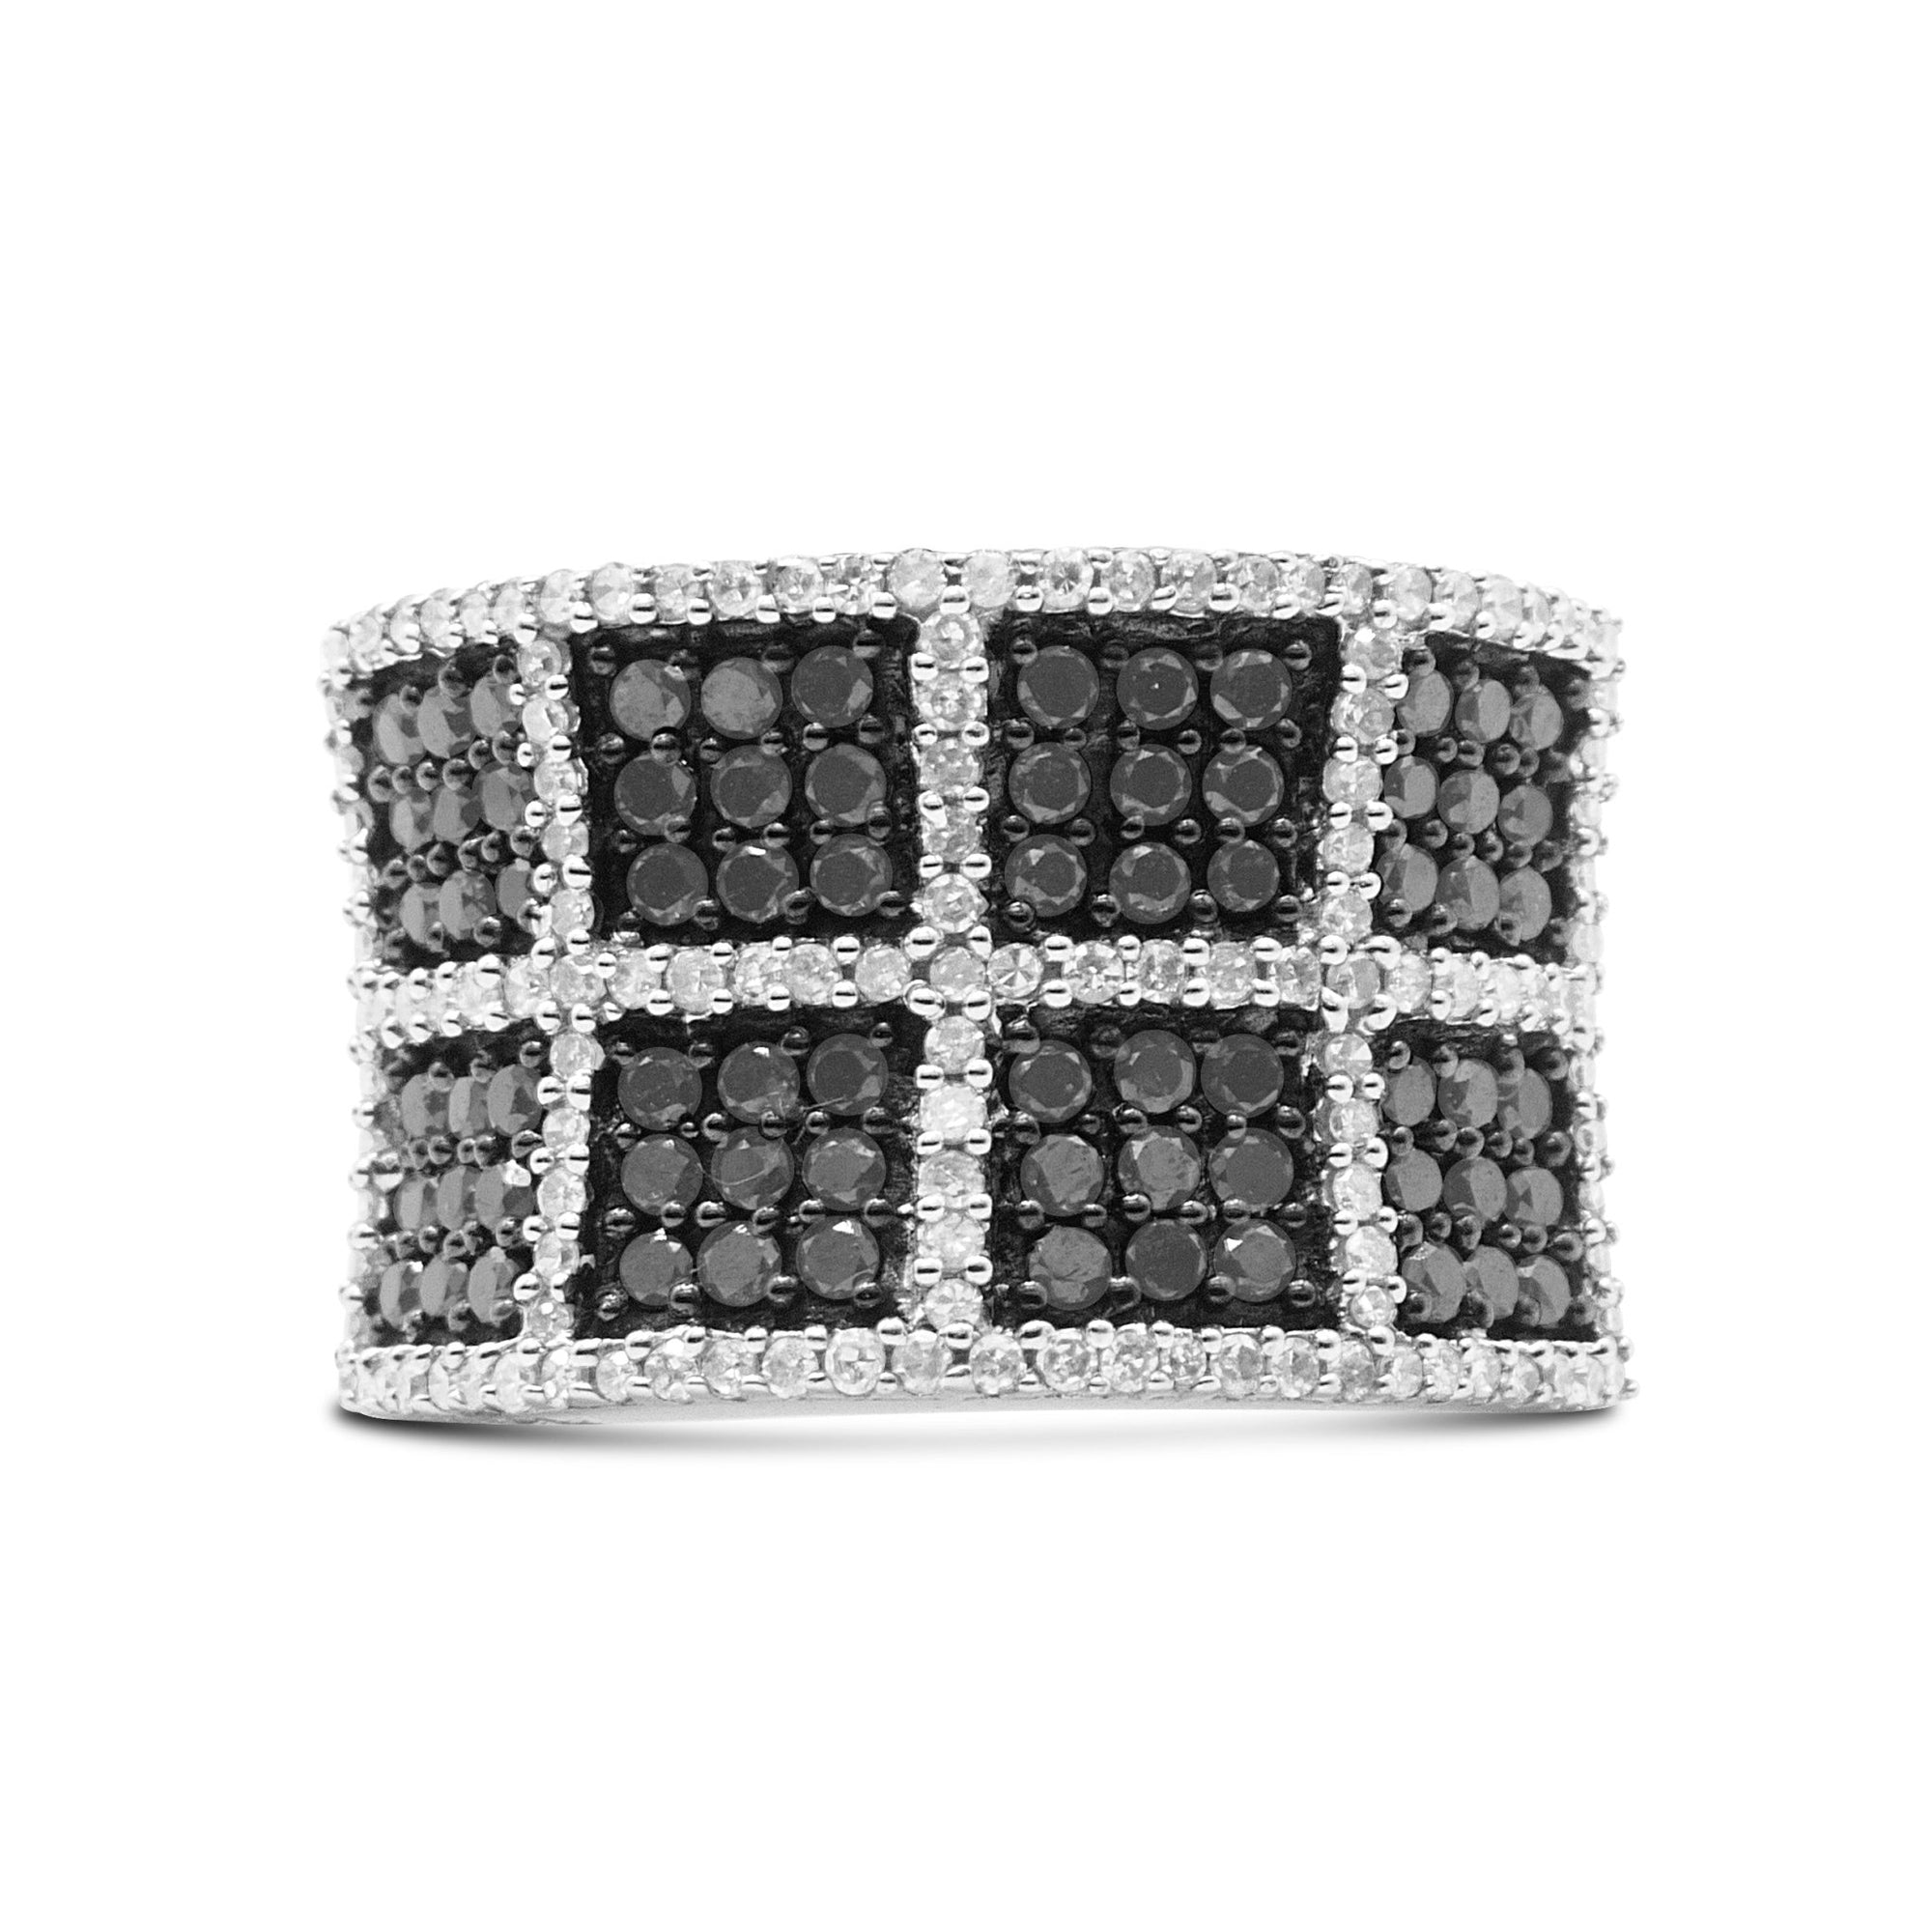 14K White Gold 1 1/2 Cttw White and Treated Black Diamond Cocktail Ring (H-I Color, I1-I2 Clarity) - Size 7 - LinkagejewelrydesignLinkagejewelrydesign